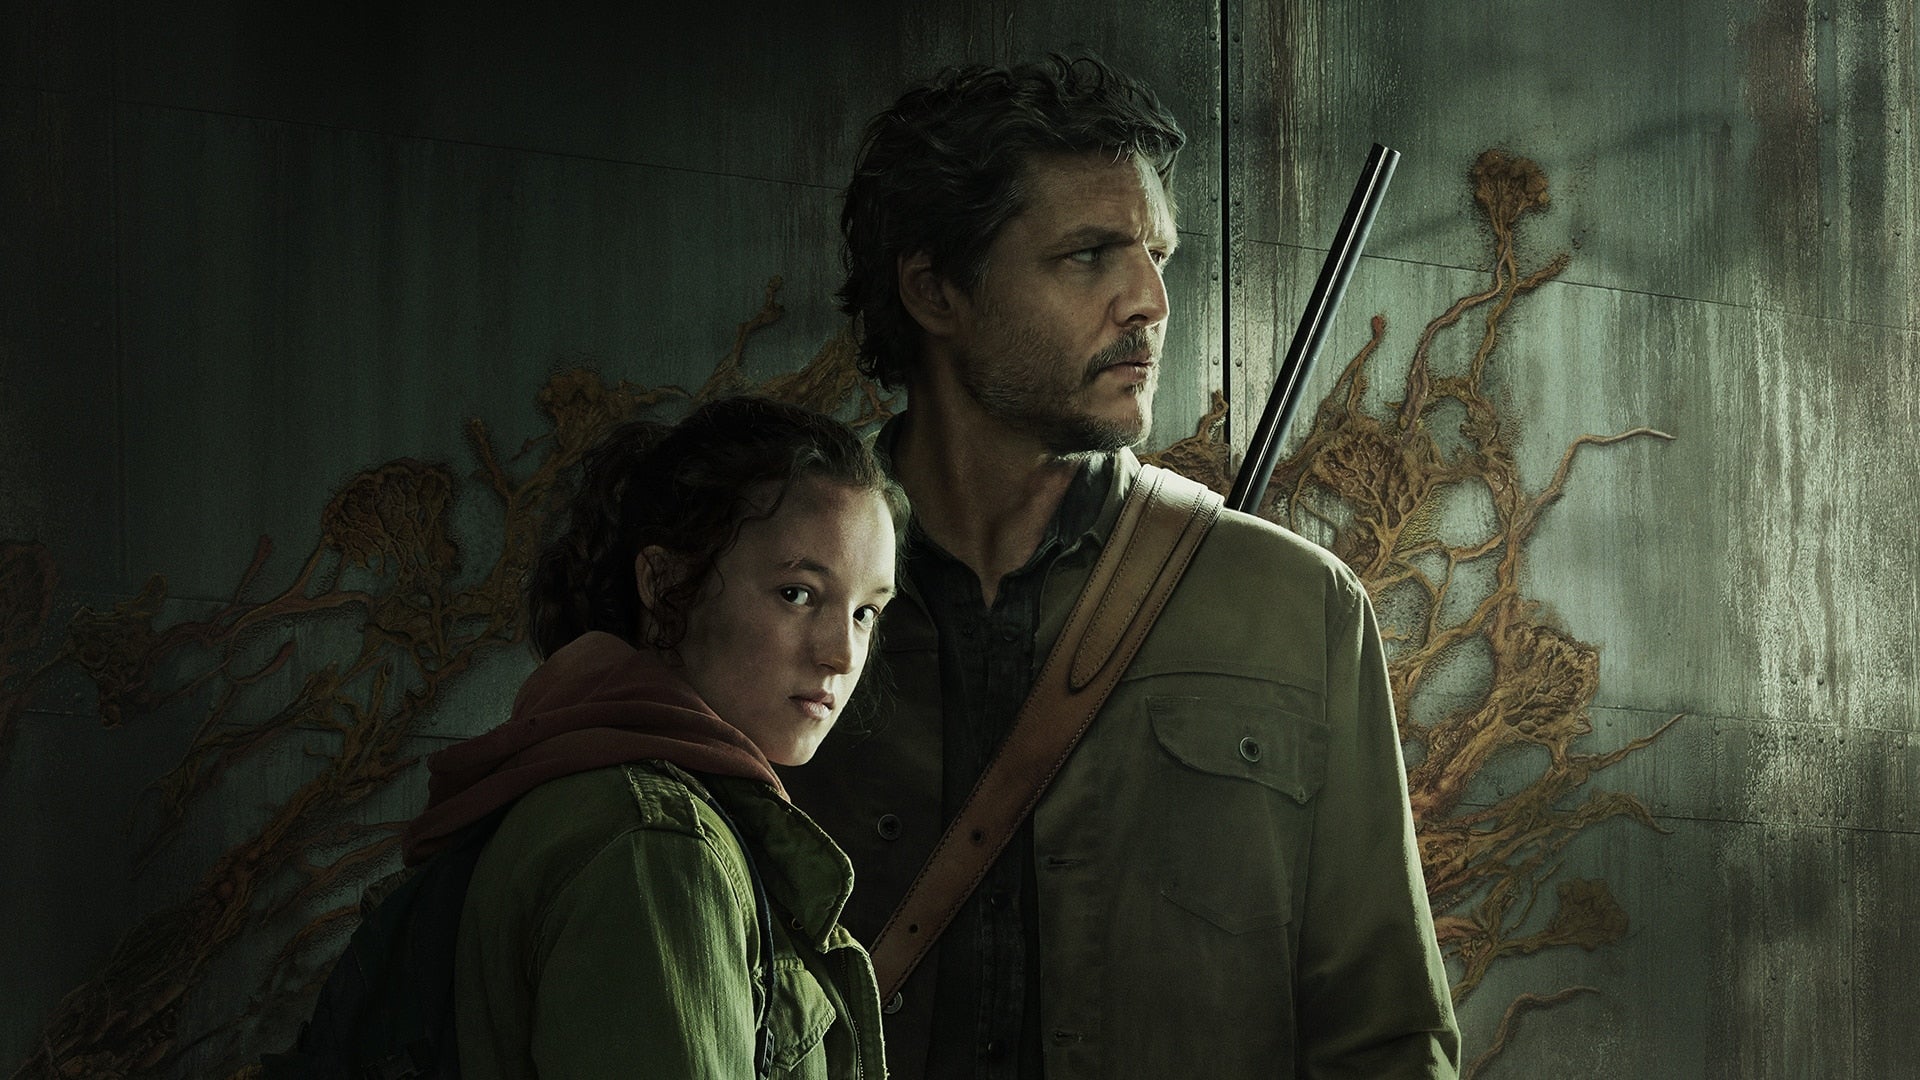 Pedro Pascal and Bella Ramsey star as Joel and Ellie in HBO's adaptation. (Image: HBO)